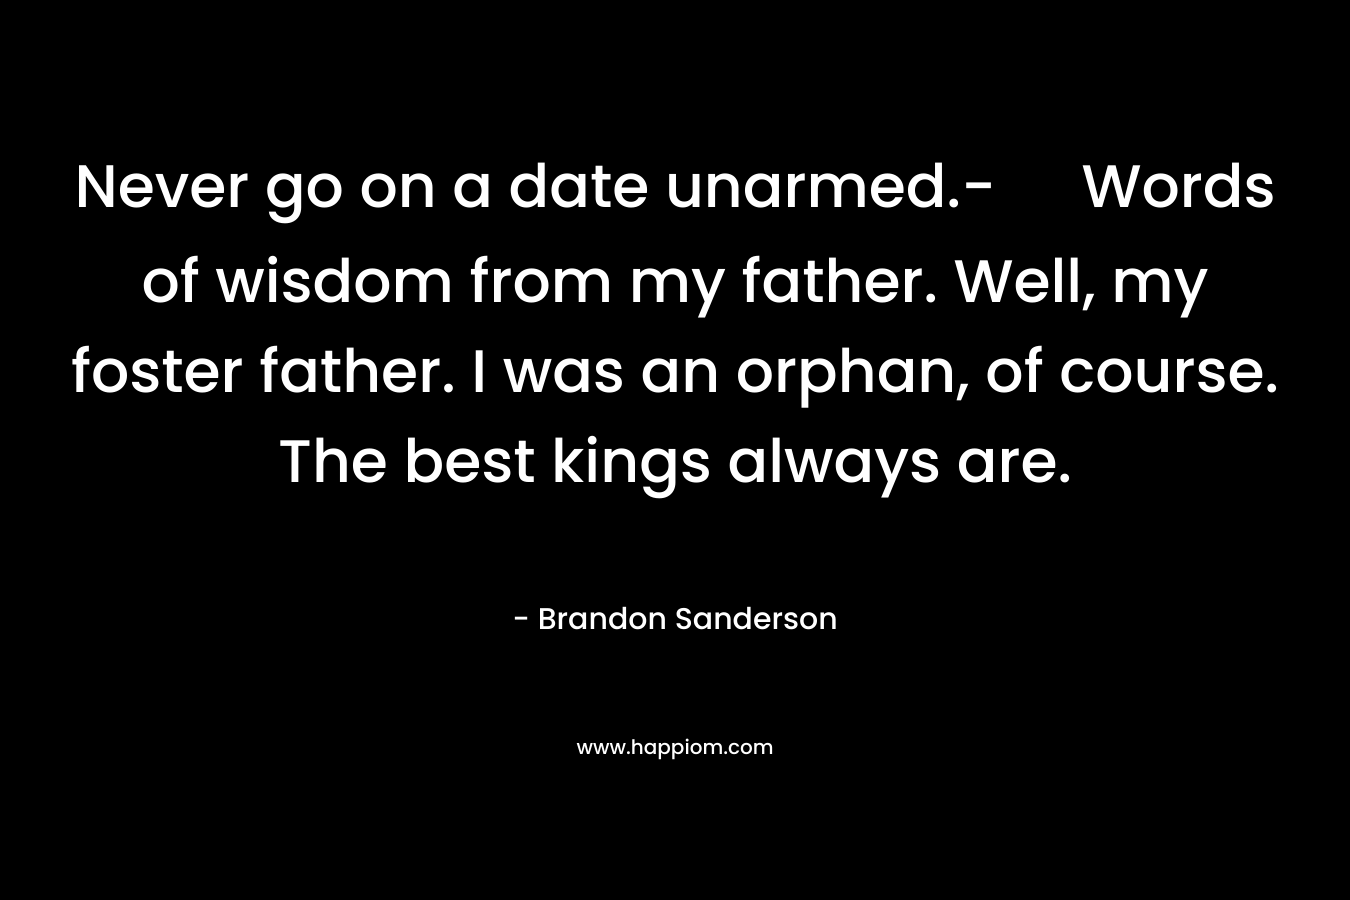 Never go on a date unarmed.- Words of wisdom from my father. Well, my foster father. I was an orphan, of course. The best kings always are.